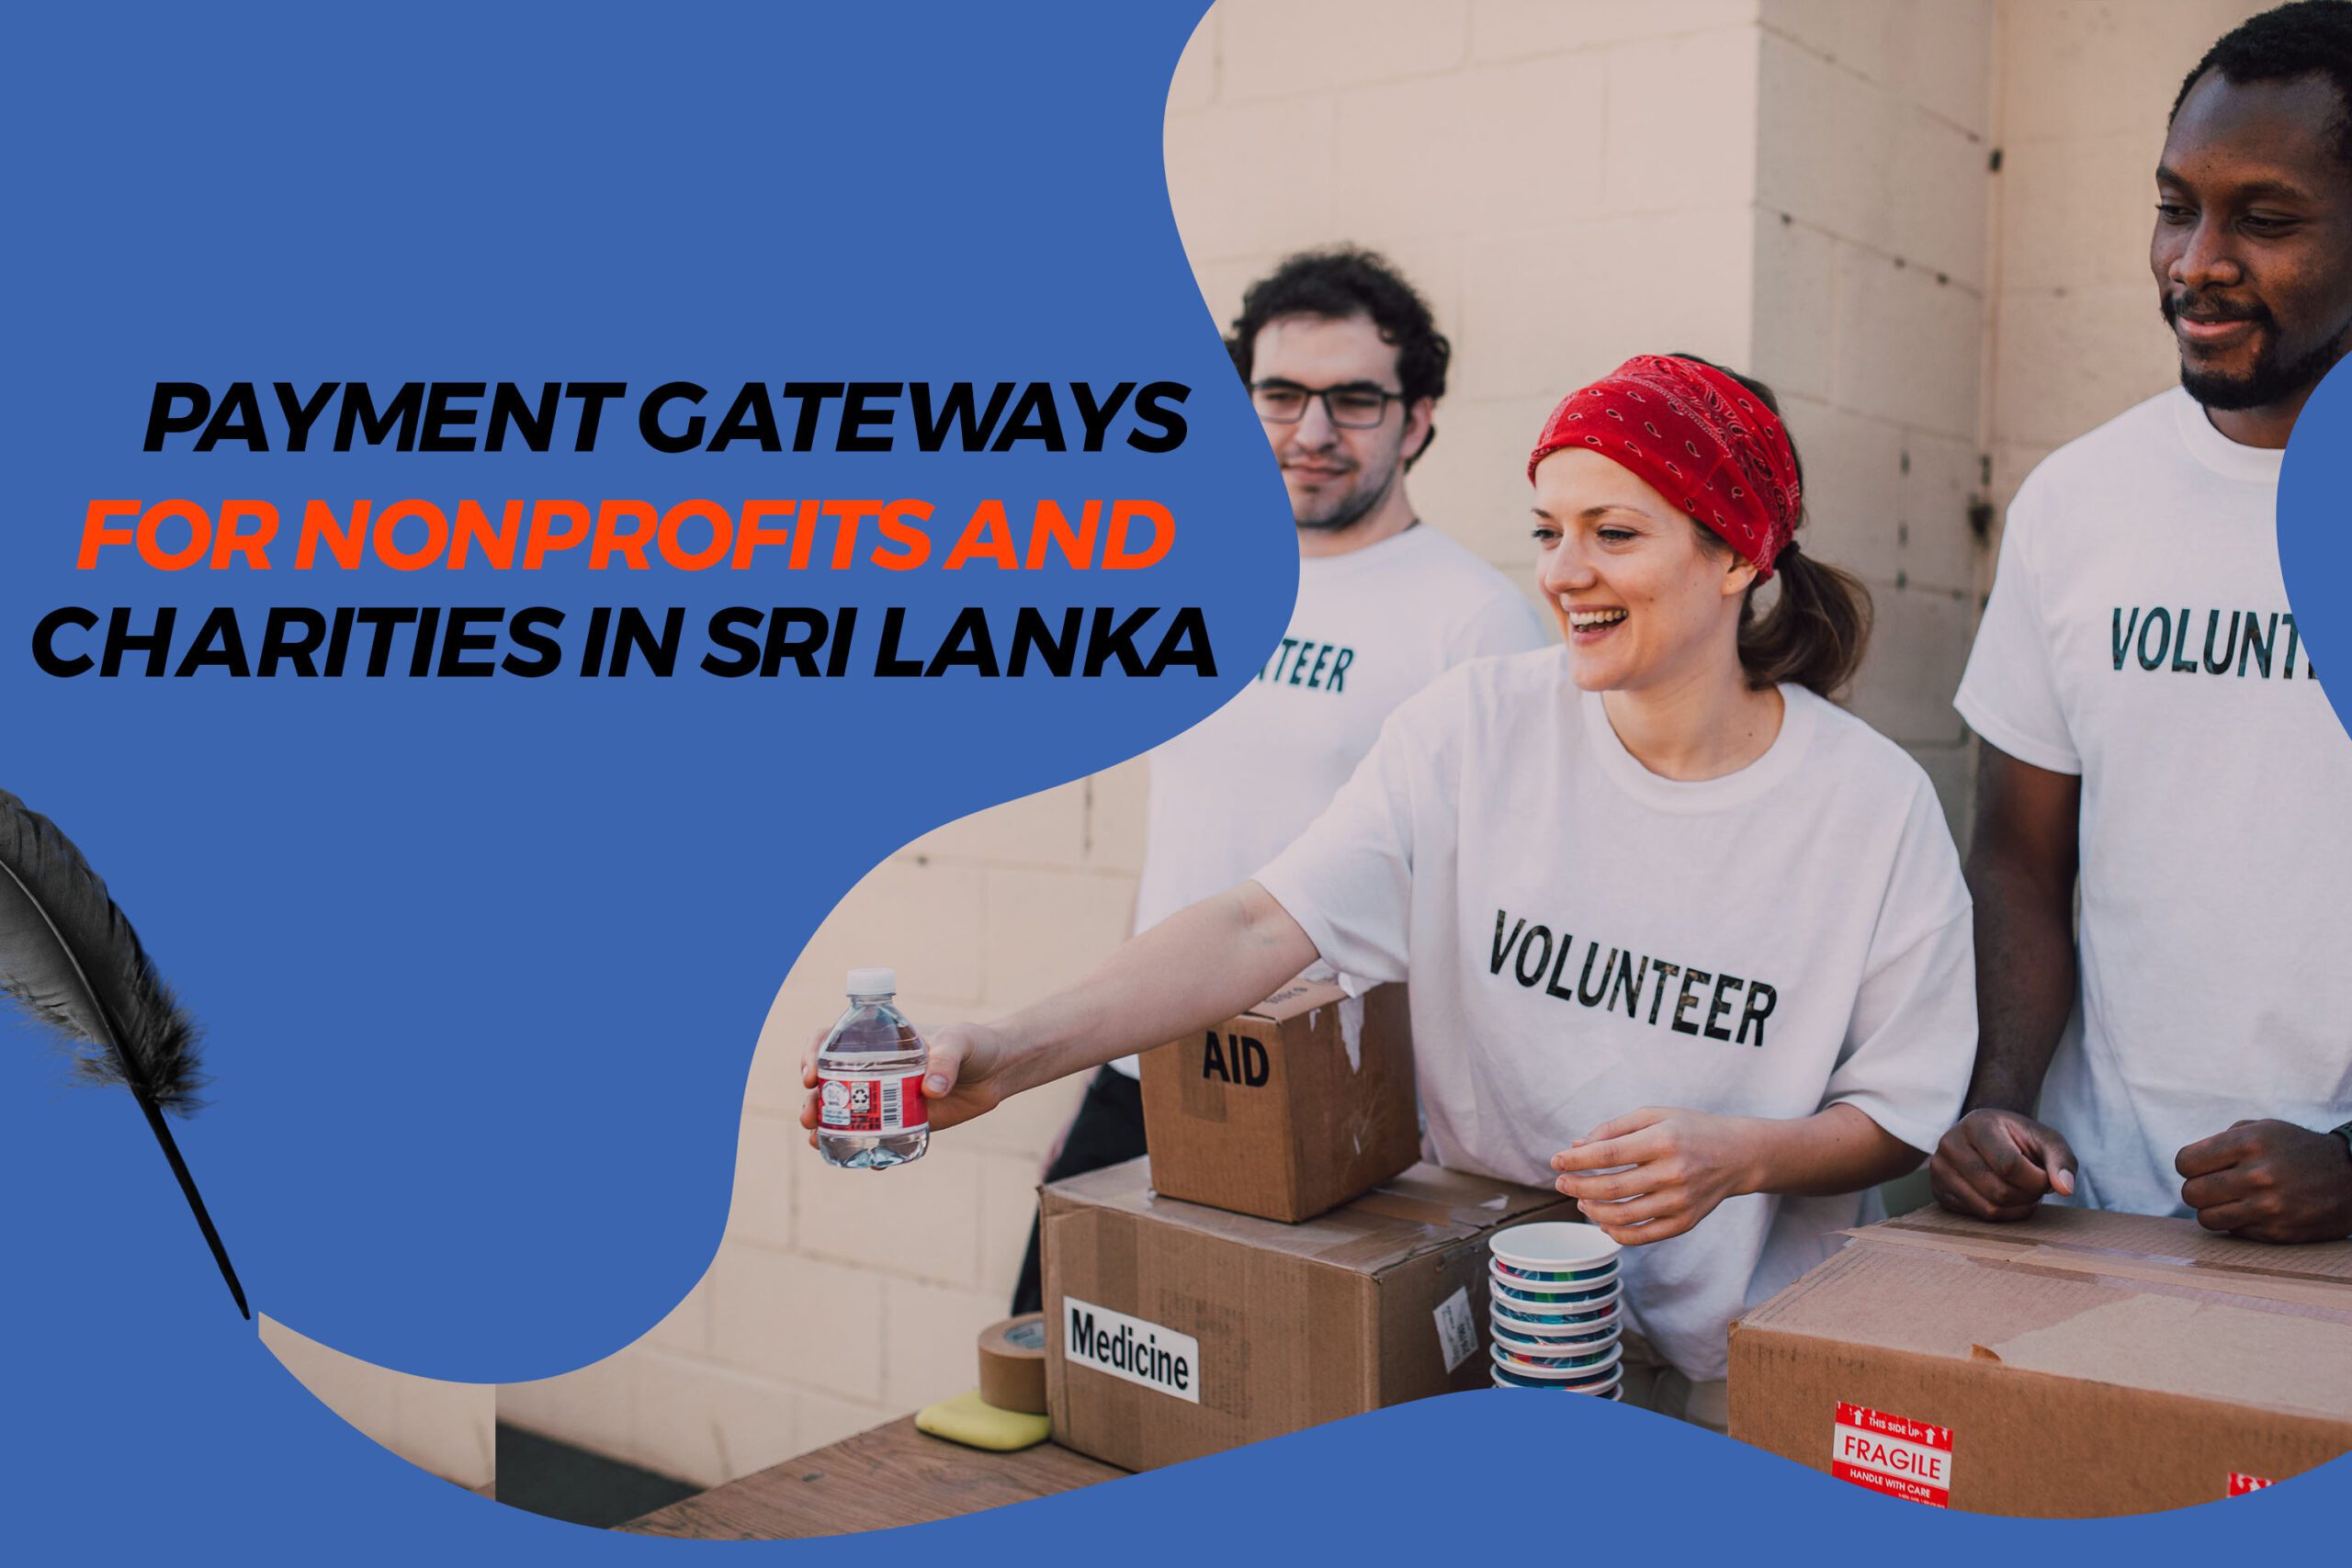 Payment Gateways for Nonprofits and Charities in Sri Lanka